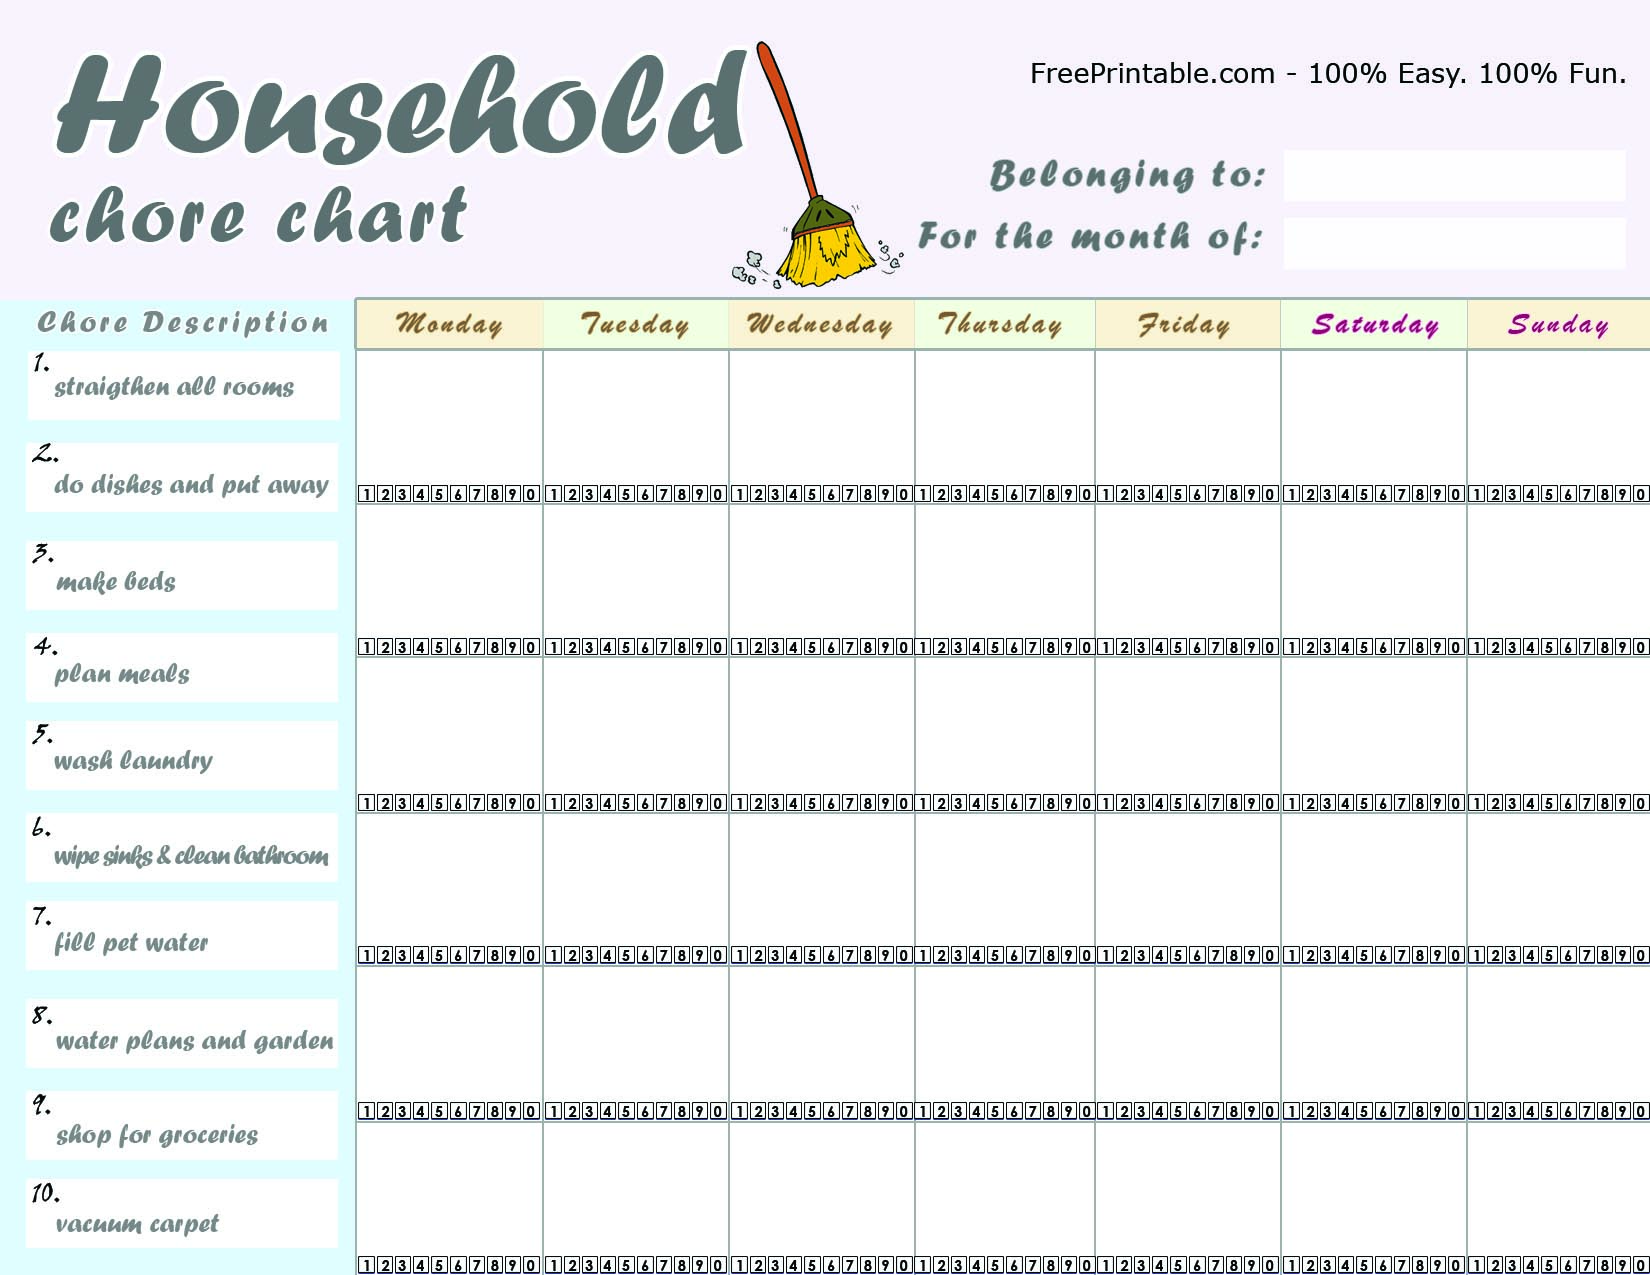 Free Printable Chore List Template For Adults